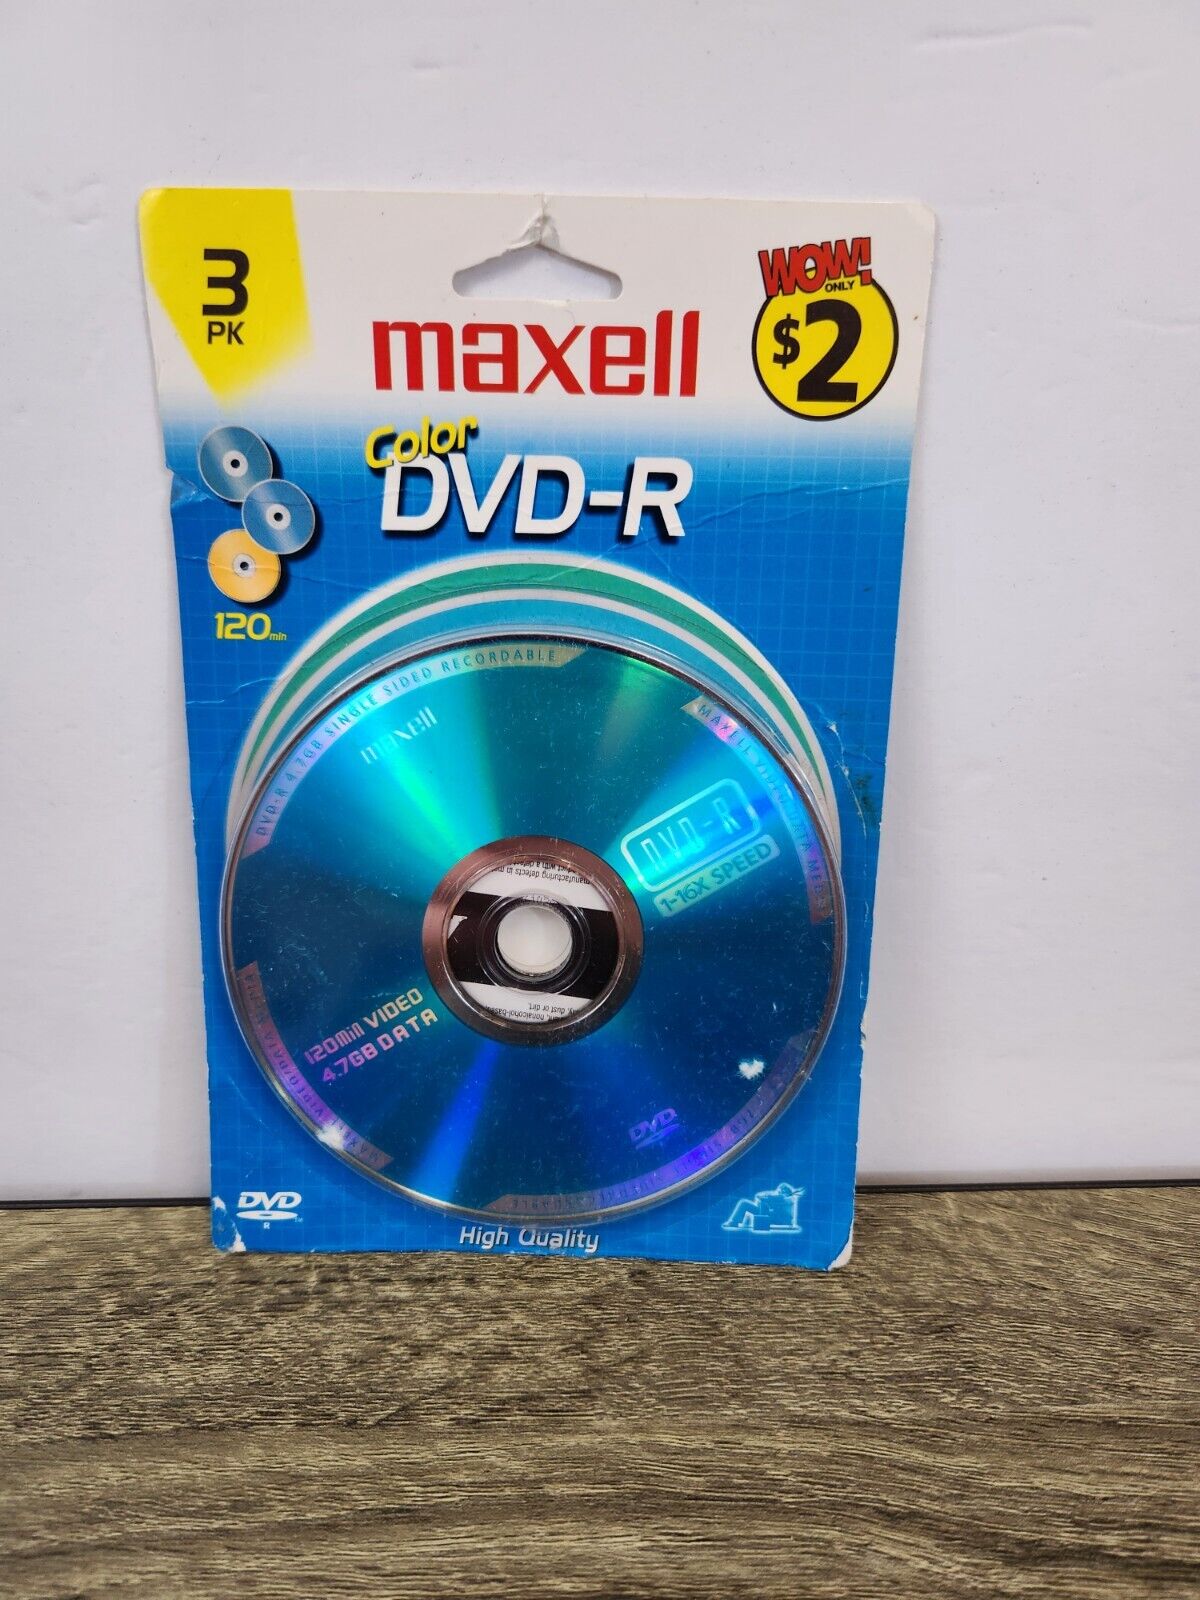 Maxell DVD-R 3 Pack Color New NIP Data Video Music Recordable Blank Media Vtg 